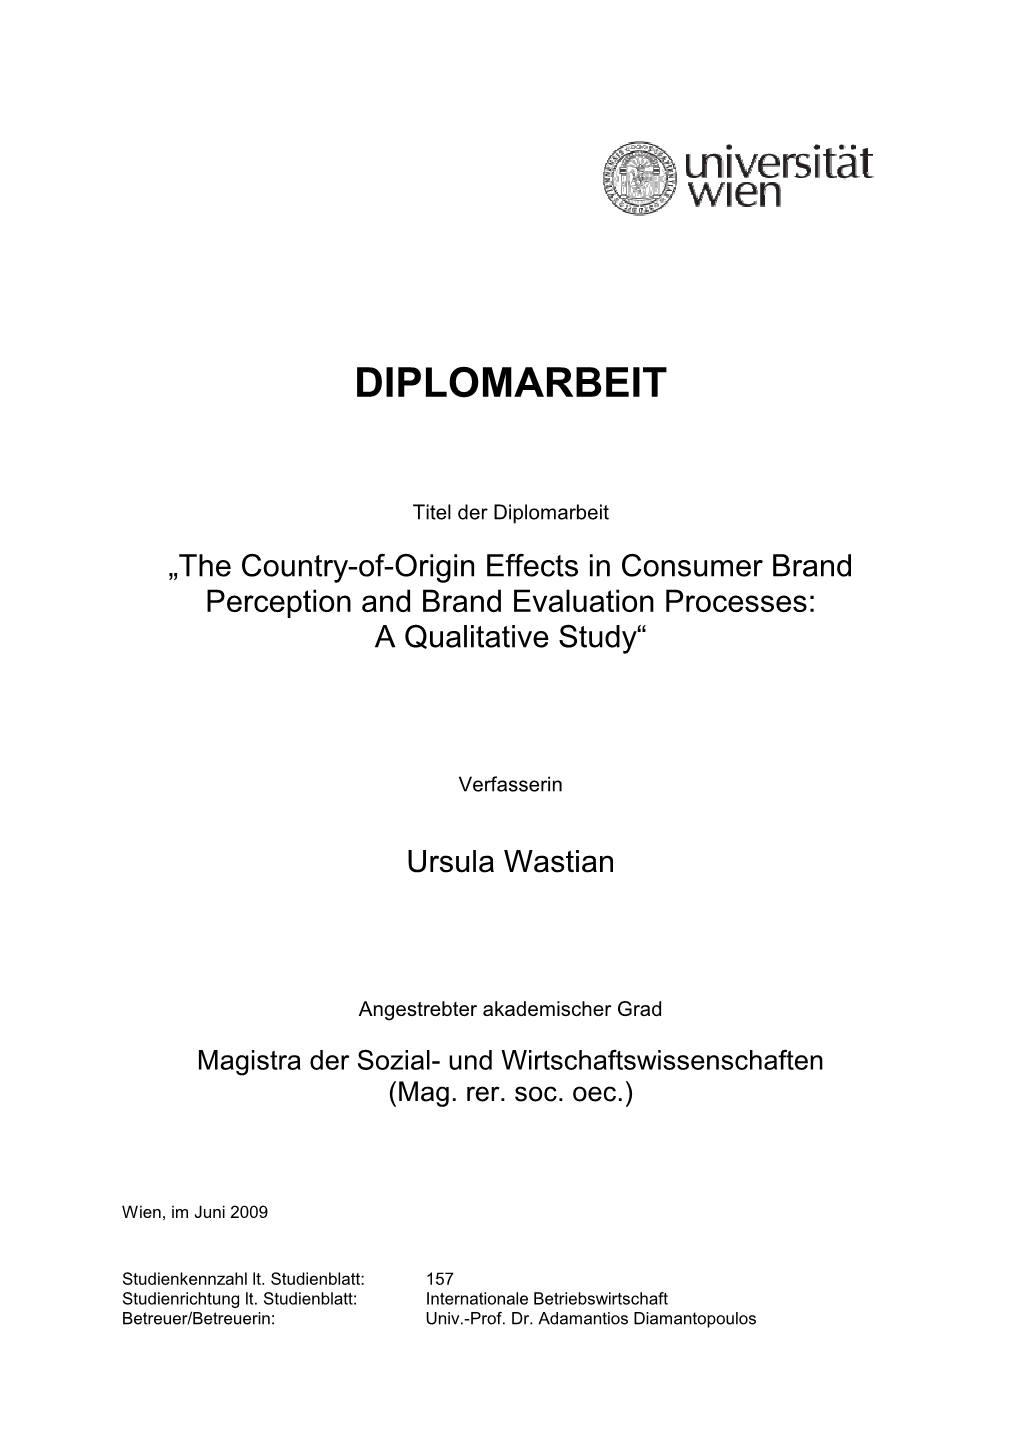 The Country-Of-Origin Effects in Consumer Brand Perception and Brand Evaluation Processes: a Qualitative Study“